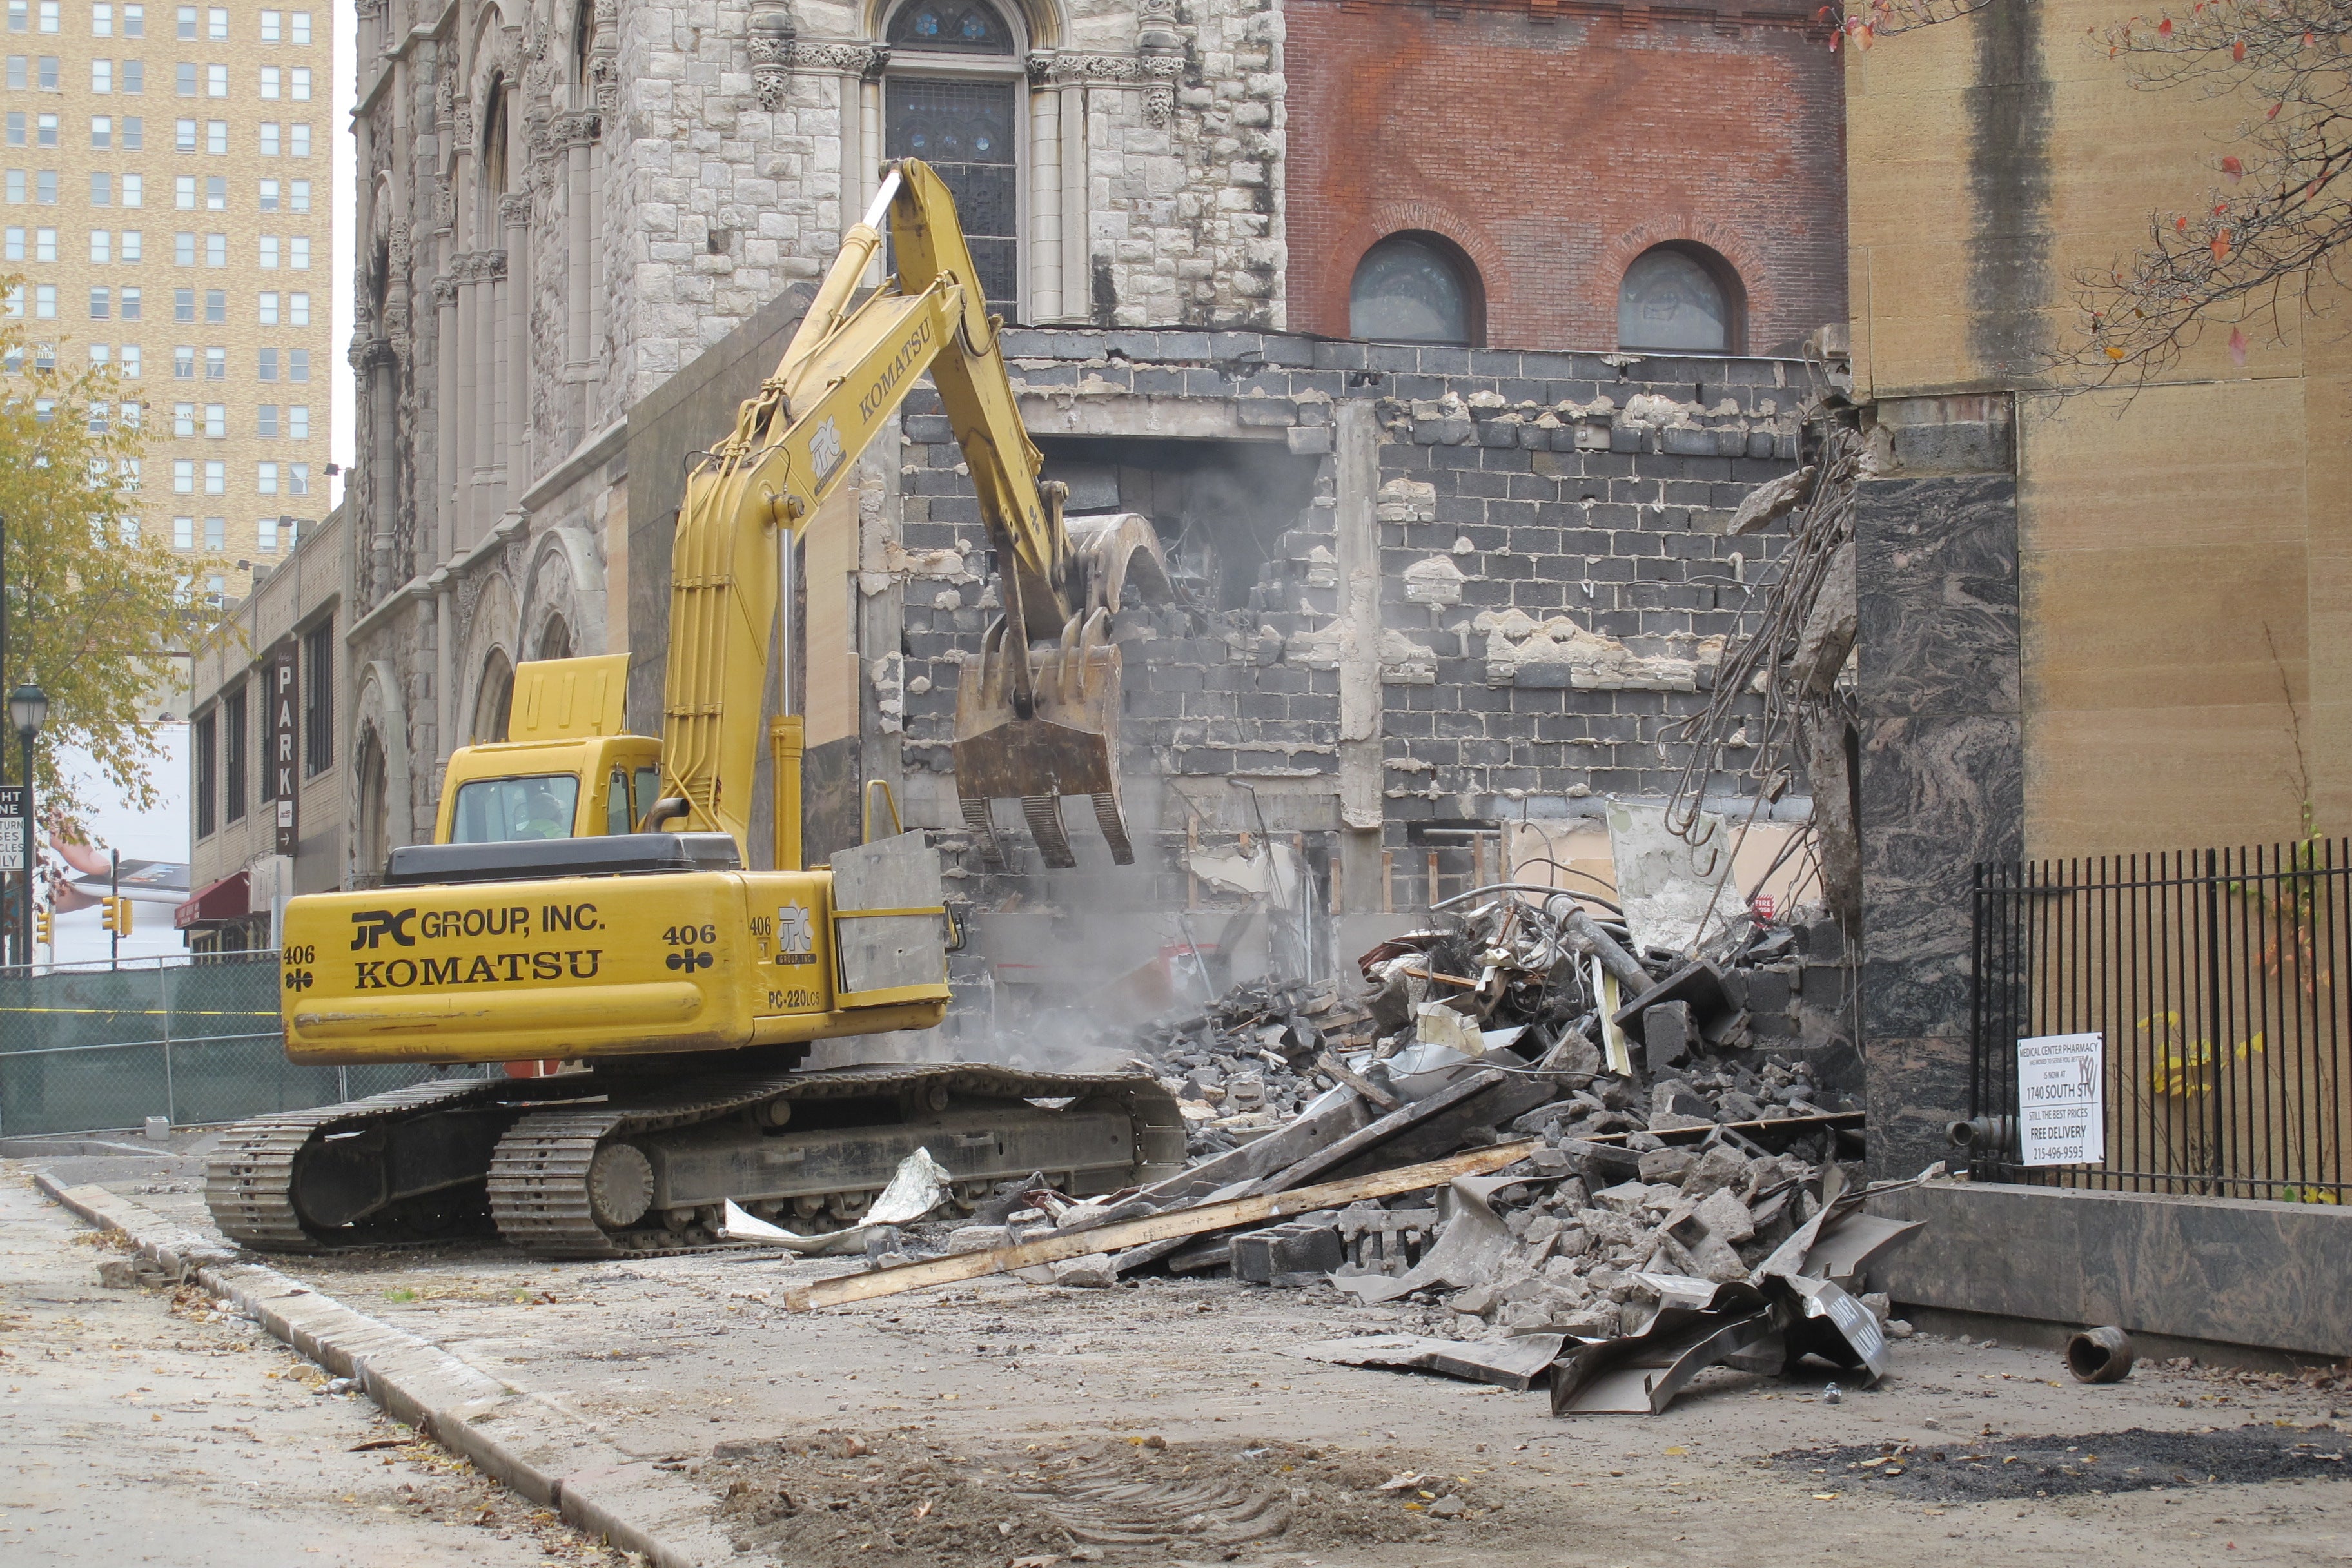 As mitigation for the loss, developers John Buck Co. are supporting preservation projects, including one at the Evangelical Lutheran Church next door (seen behind bulldozer).